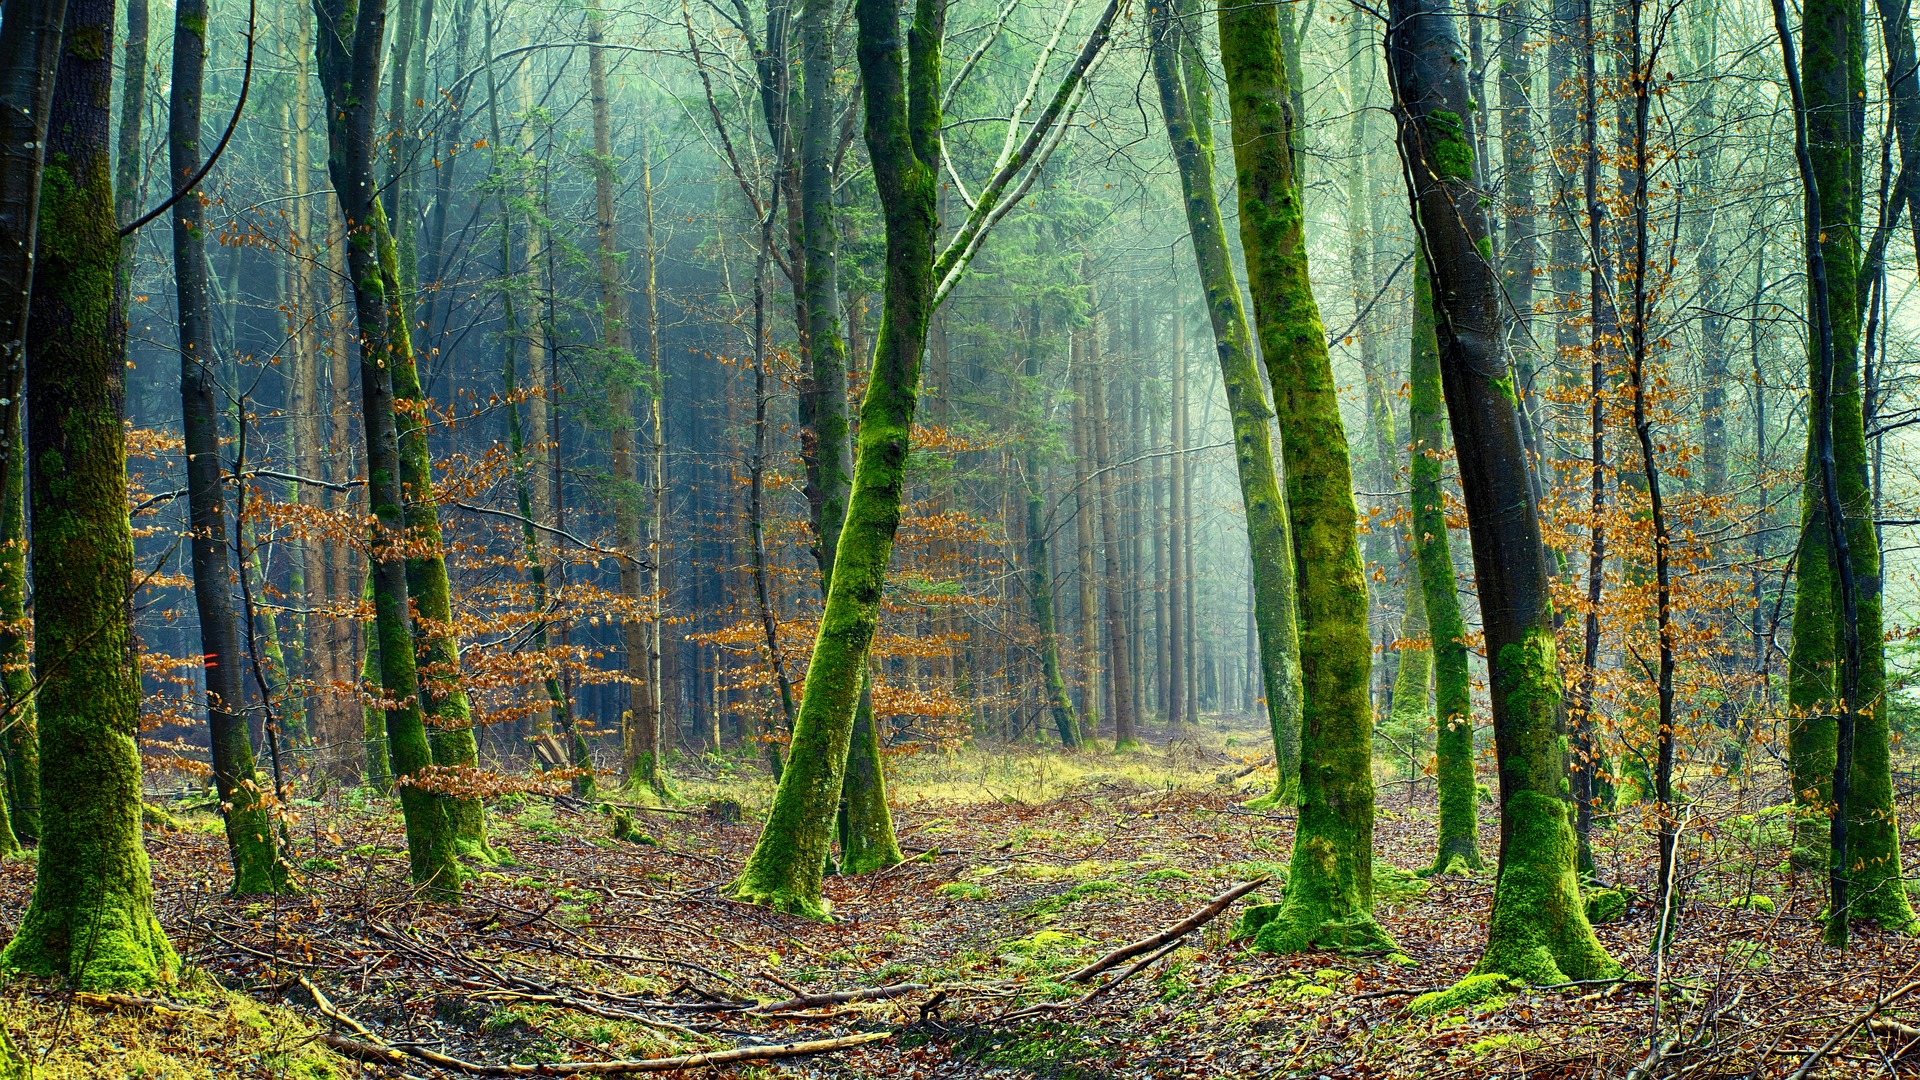 Trees in the forest. Image by jplenio from Pixabay.